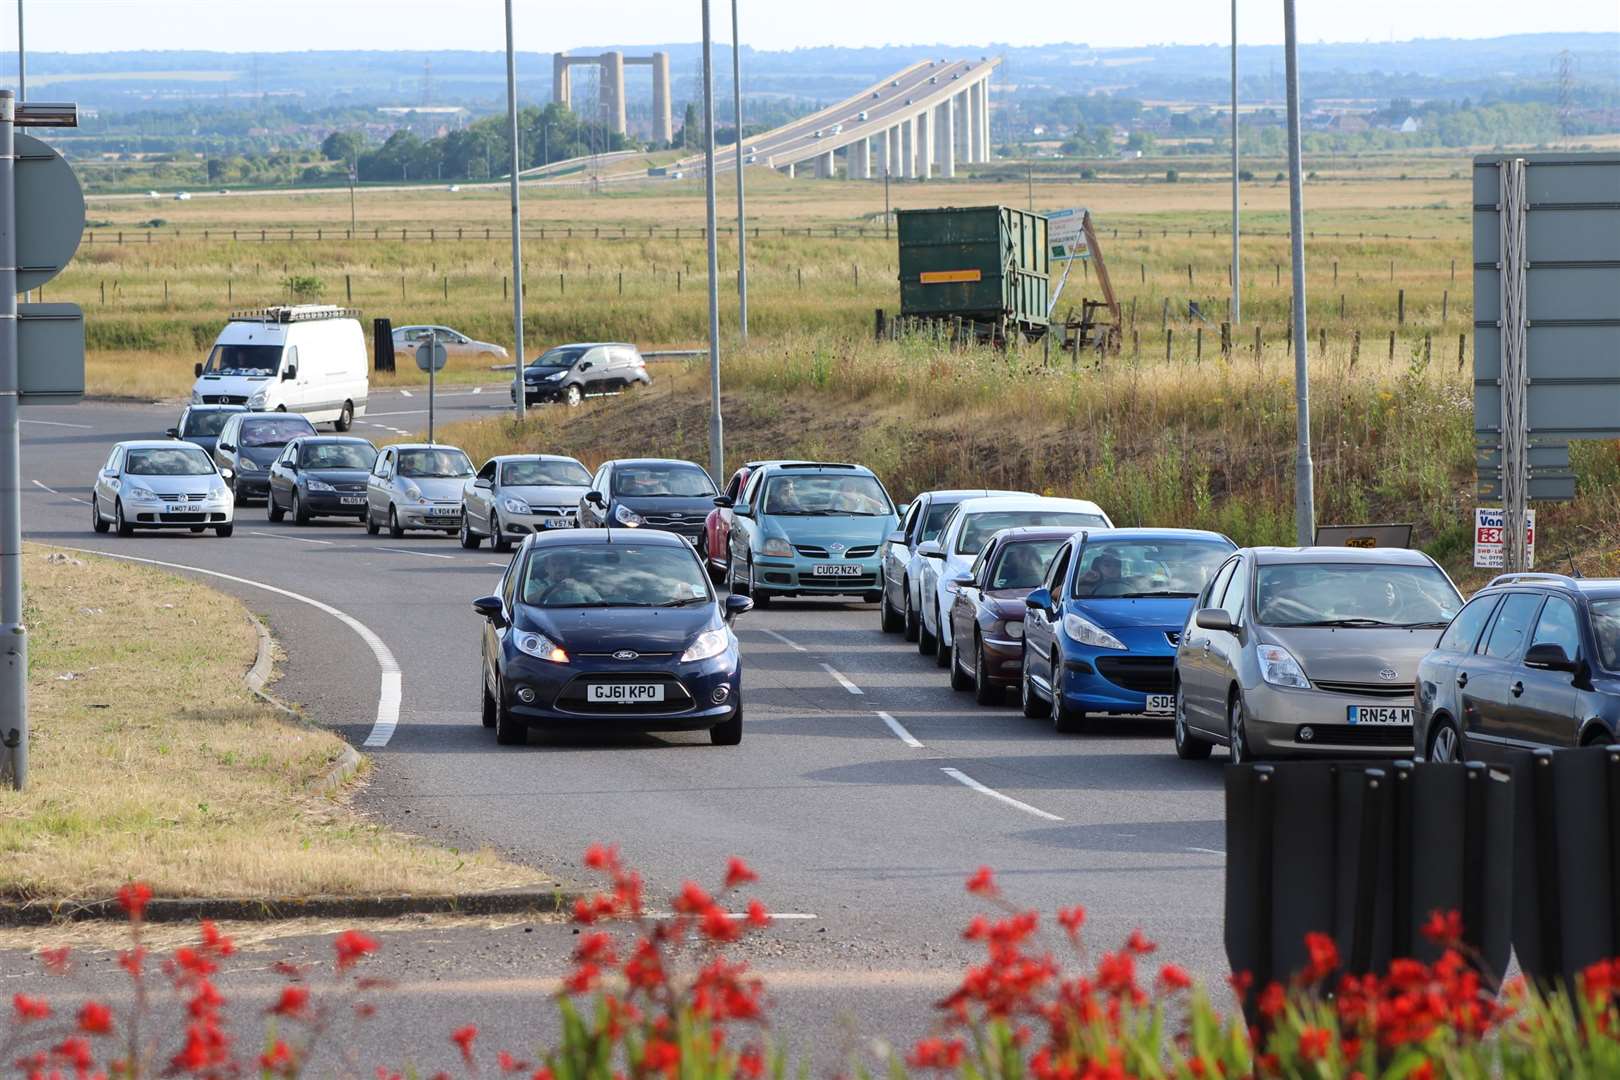 Traffic at Cowstead Corner roundabout, A249, Sheppey